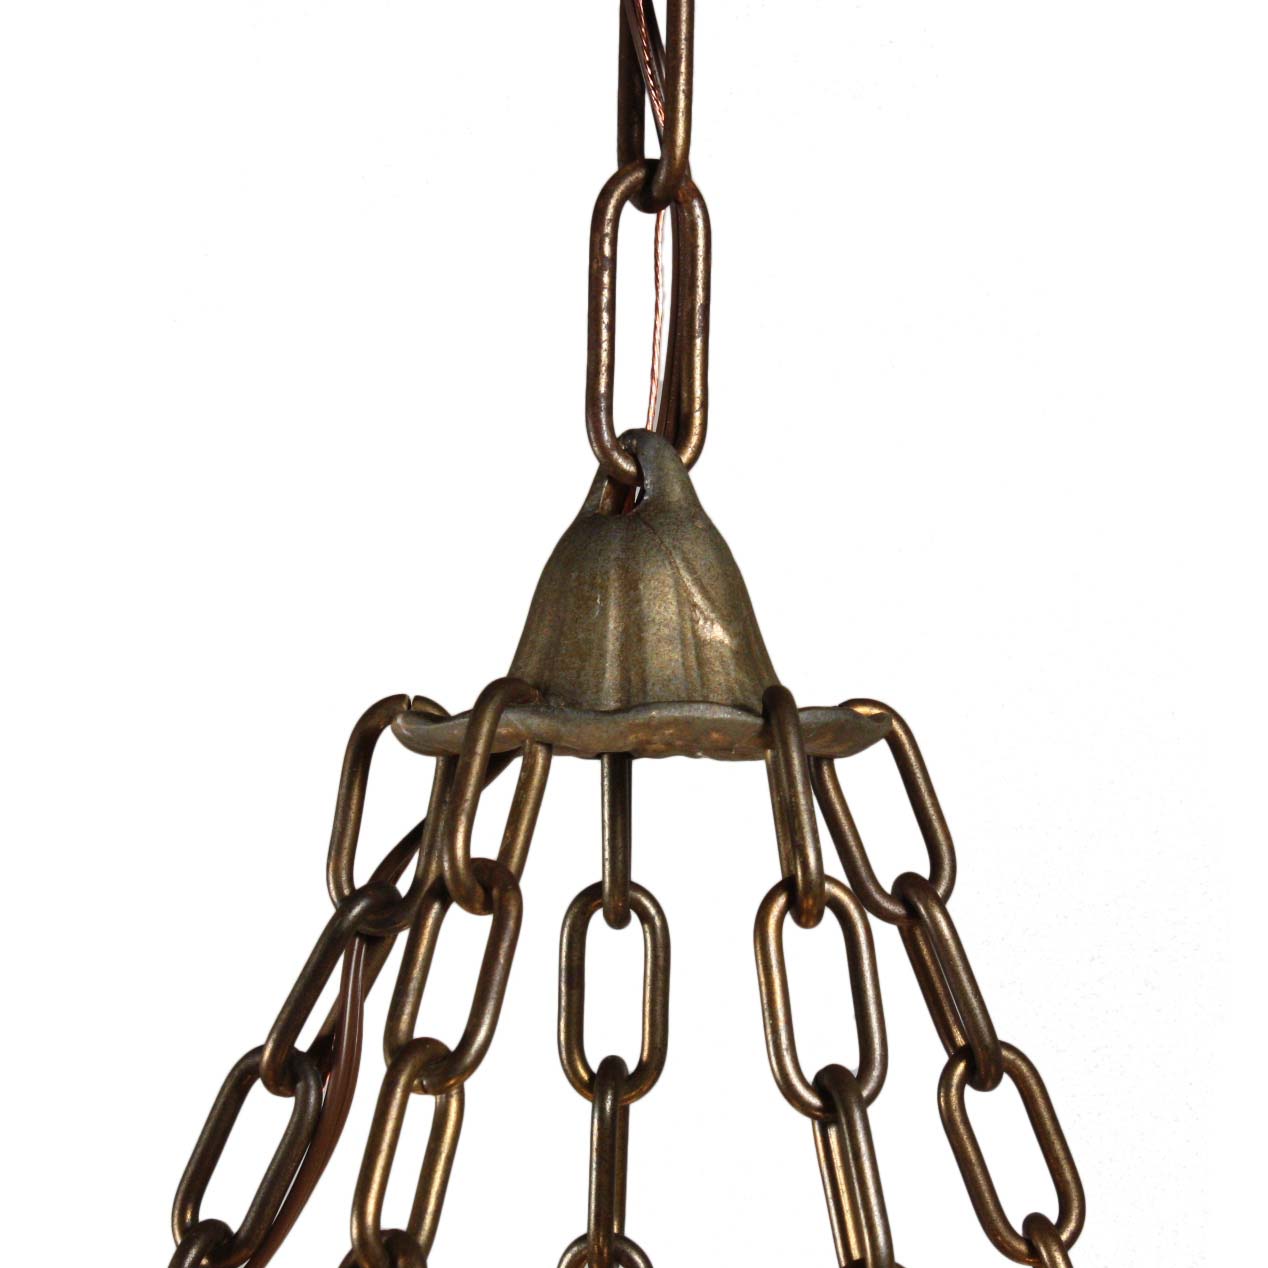 Art Deco Slip Shade Chandelier by Lincoln, Antique Lighting-68094